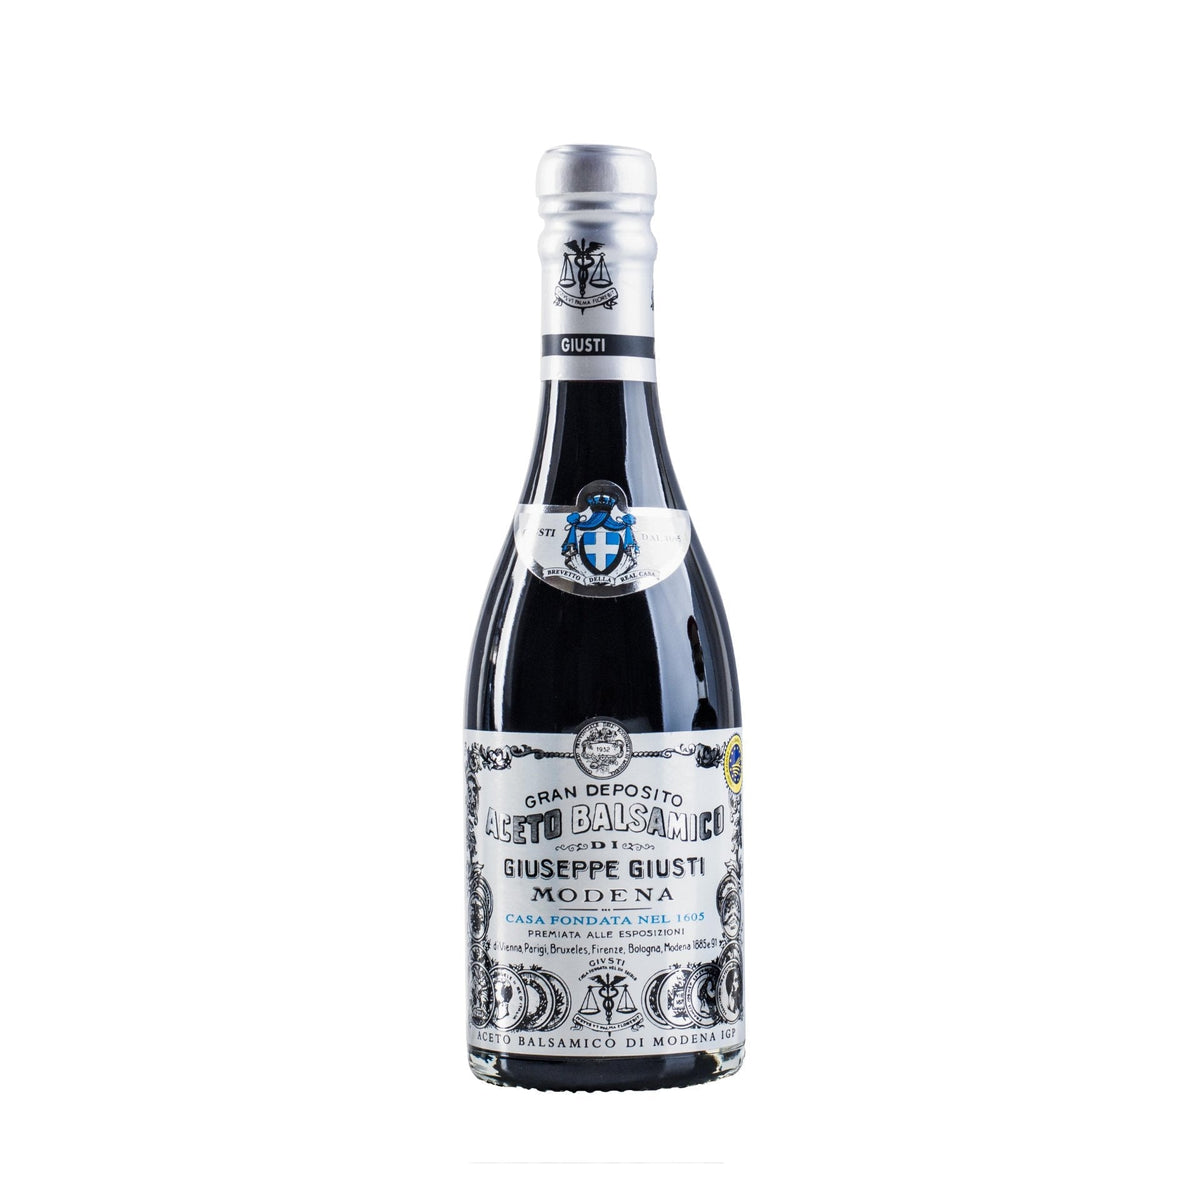 Acetaia Giusti 1 Silver Medal Champagnotta 250ml (6 years) Balsamic Vinegar of Modena IGP  | Imported and distributed in the UK by Just Gourmet Foods